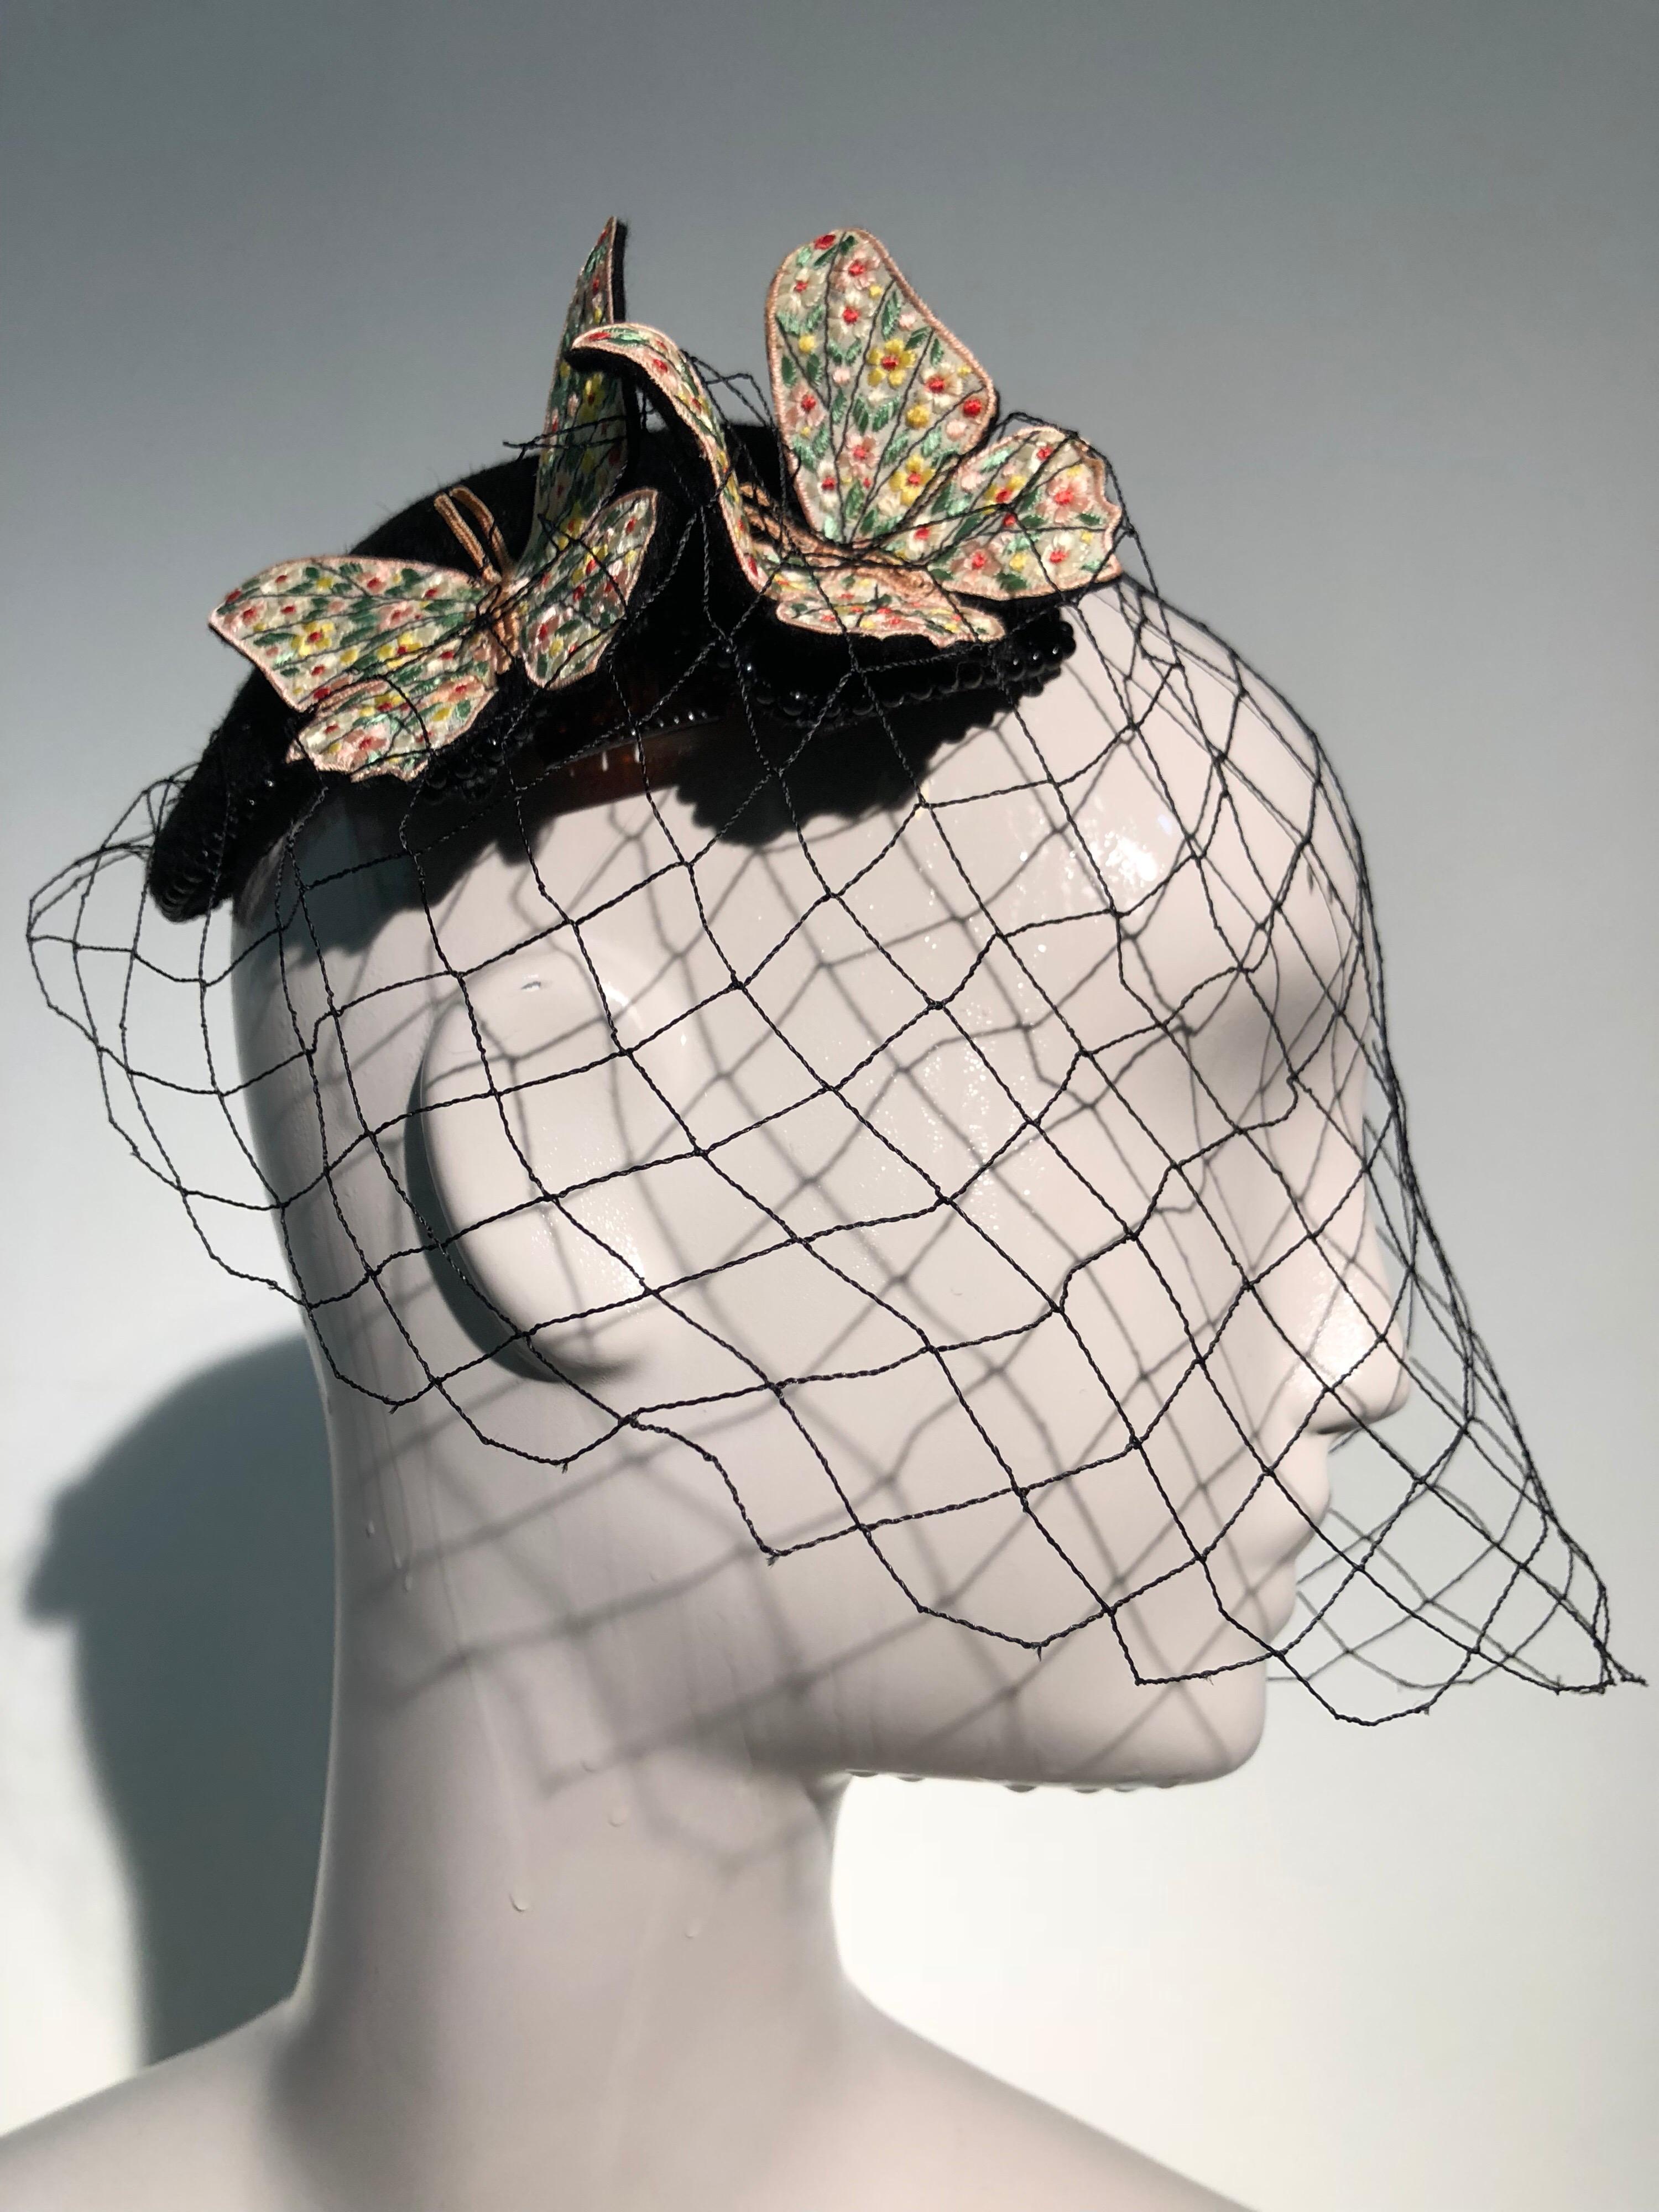 A wonderful 1966 Bes-Ben black felt cap with black bead trim at edge, colorful floral embroidered butterflies perched on top and an open net veil. A little drama perhaps?